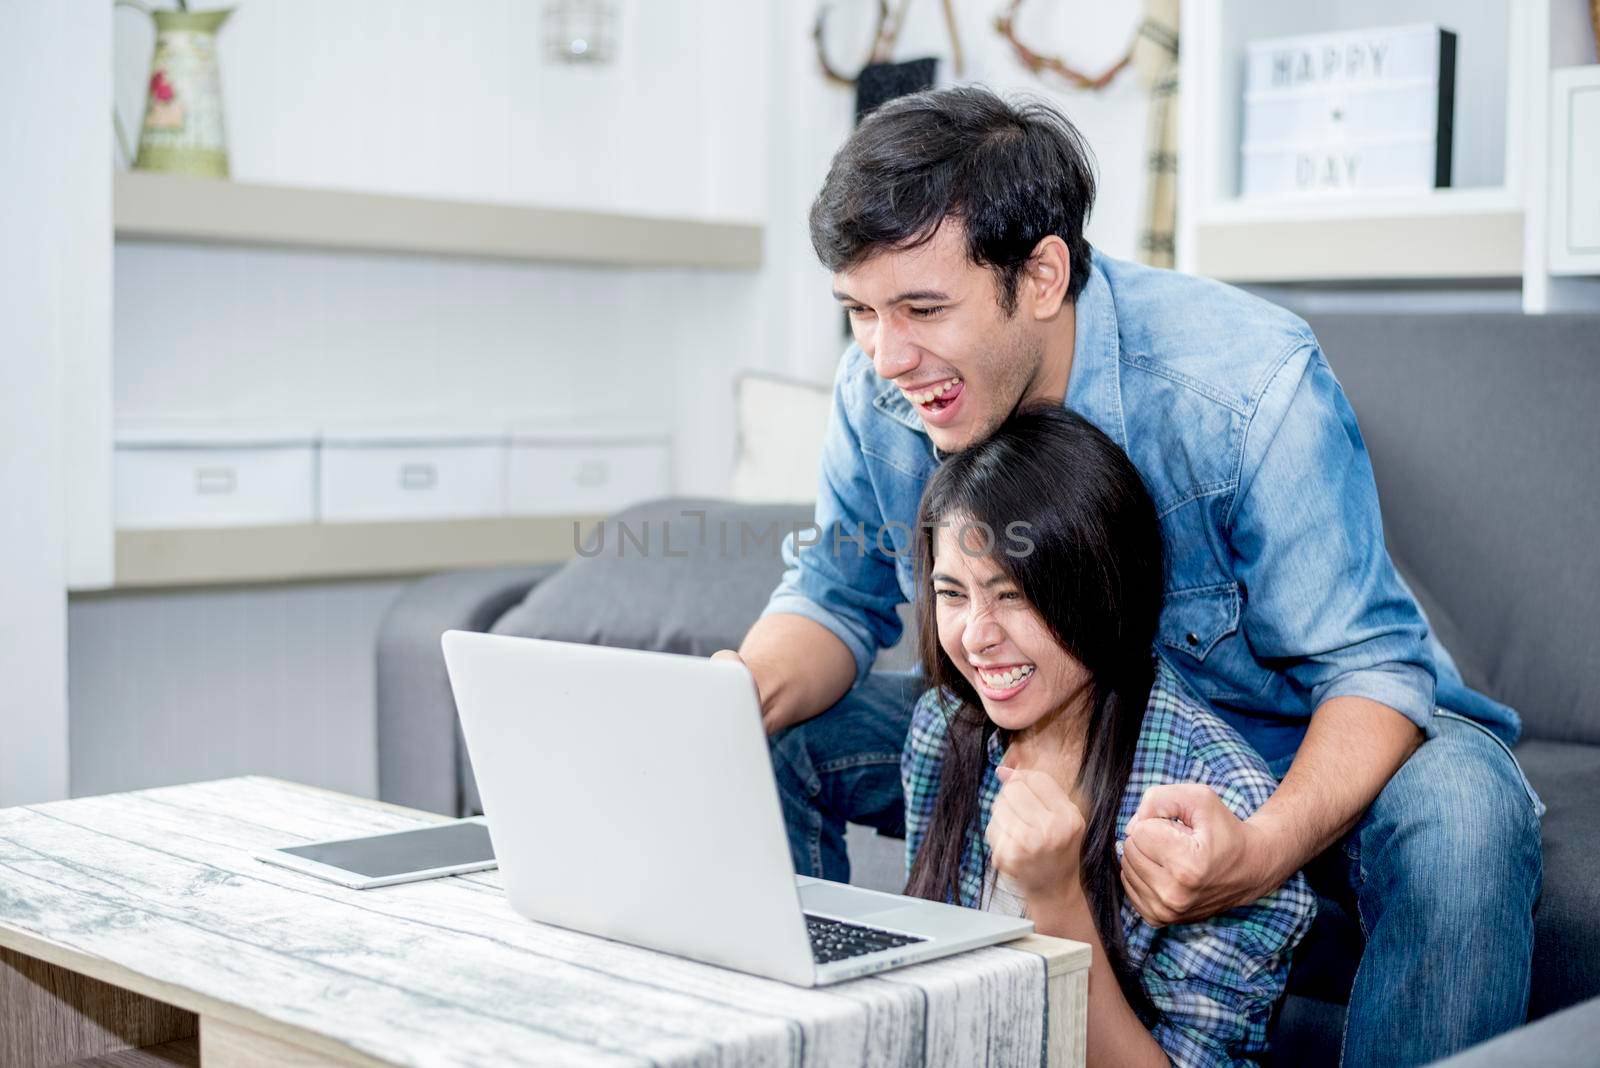 Lover are surprising when using the laptop. Family concept, Lovers concept, Technology concept